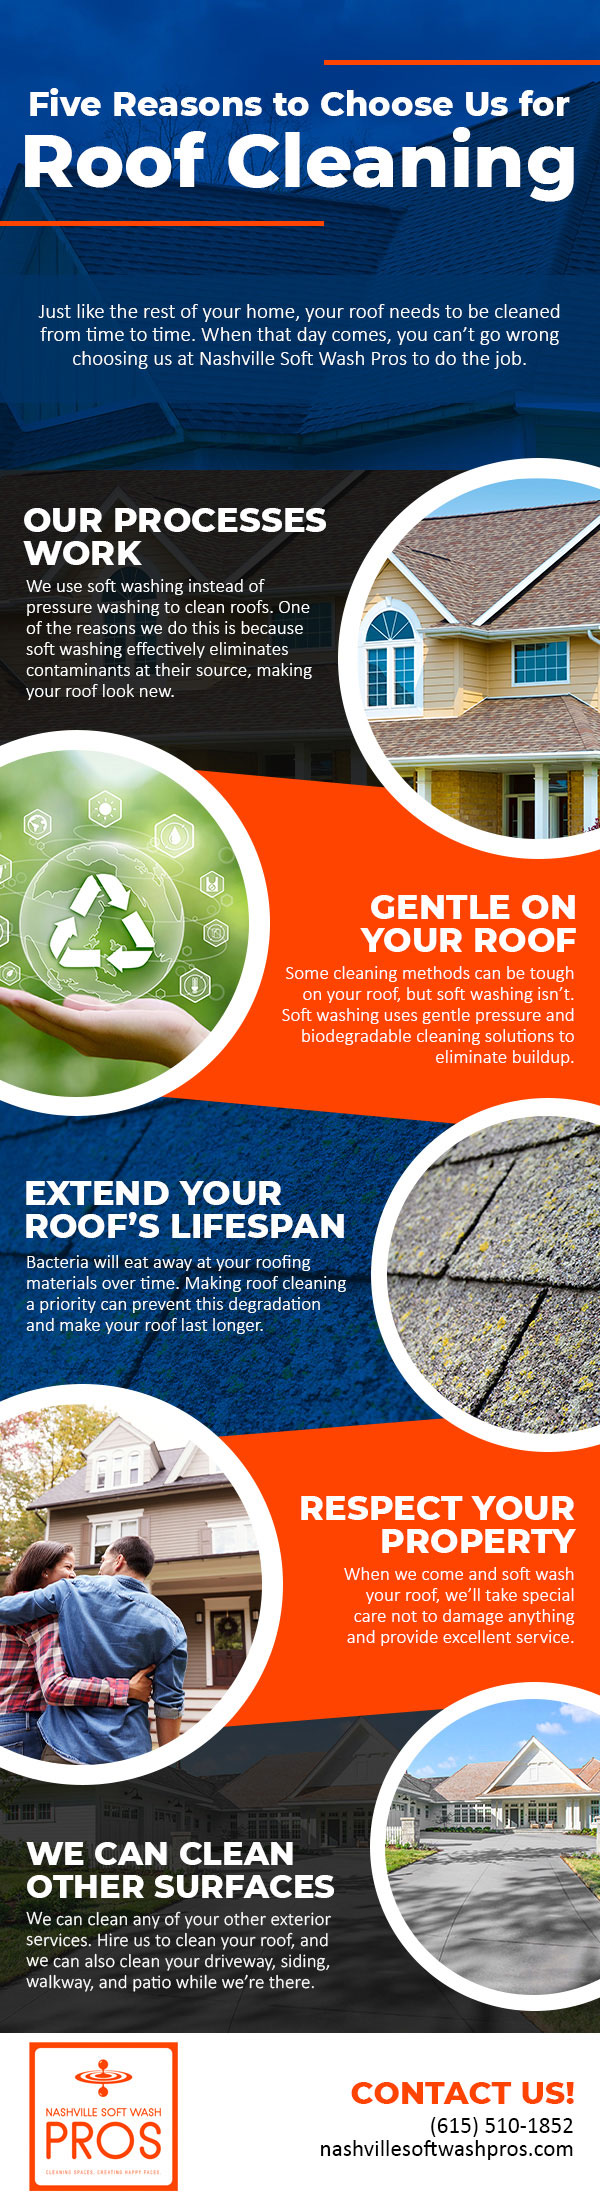 Get rid of unsightly and damaging contaminants with roof washing